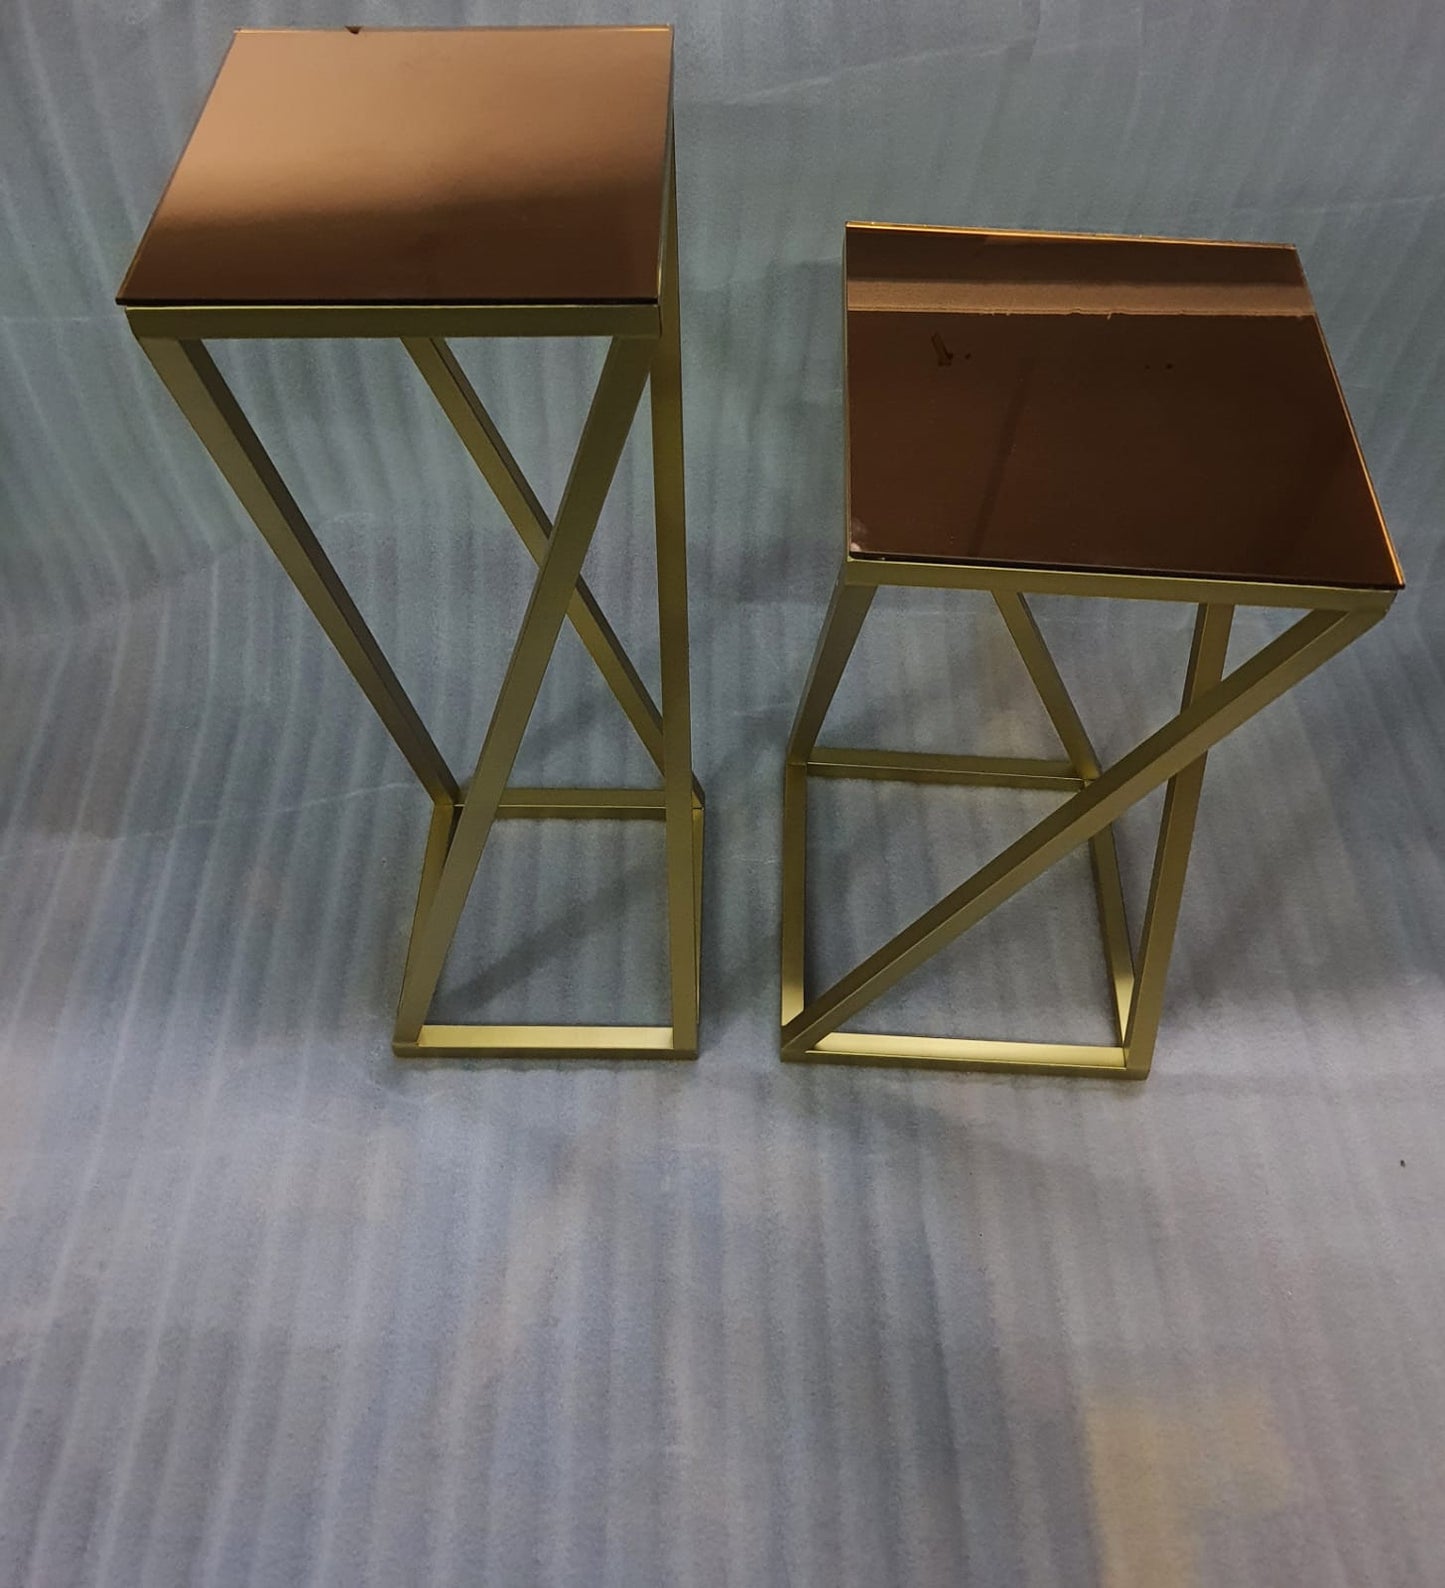 PC Home Decor | Set of 2 Side Table, Gold and Brown